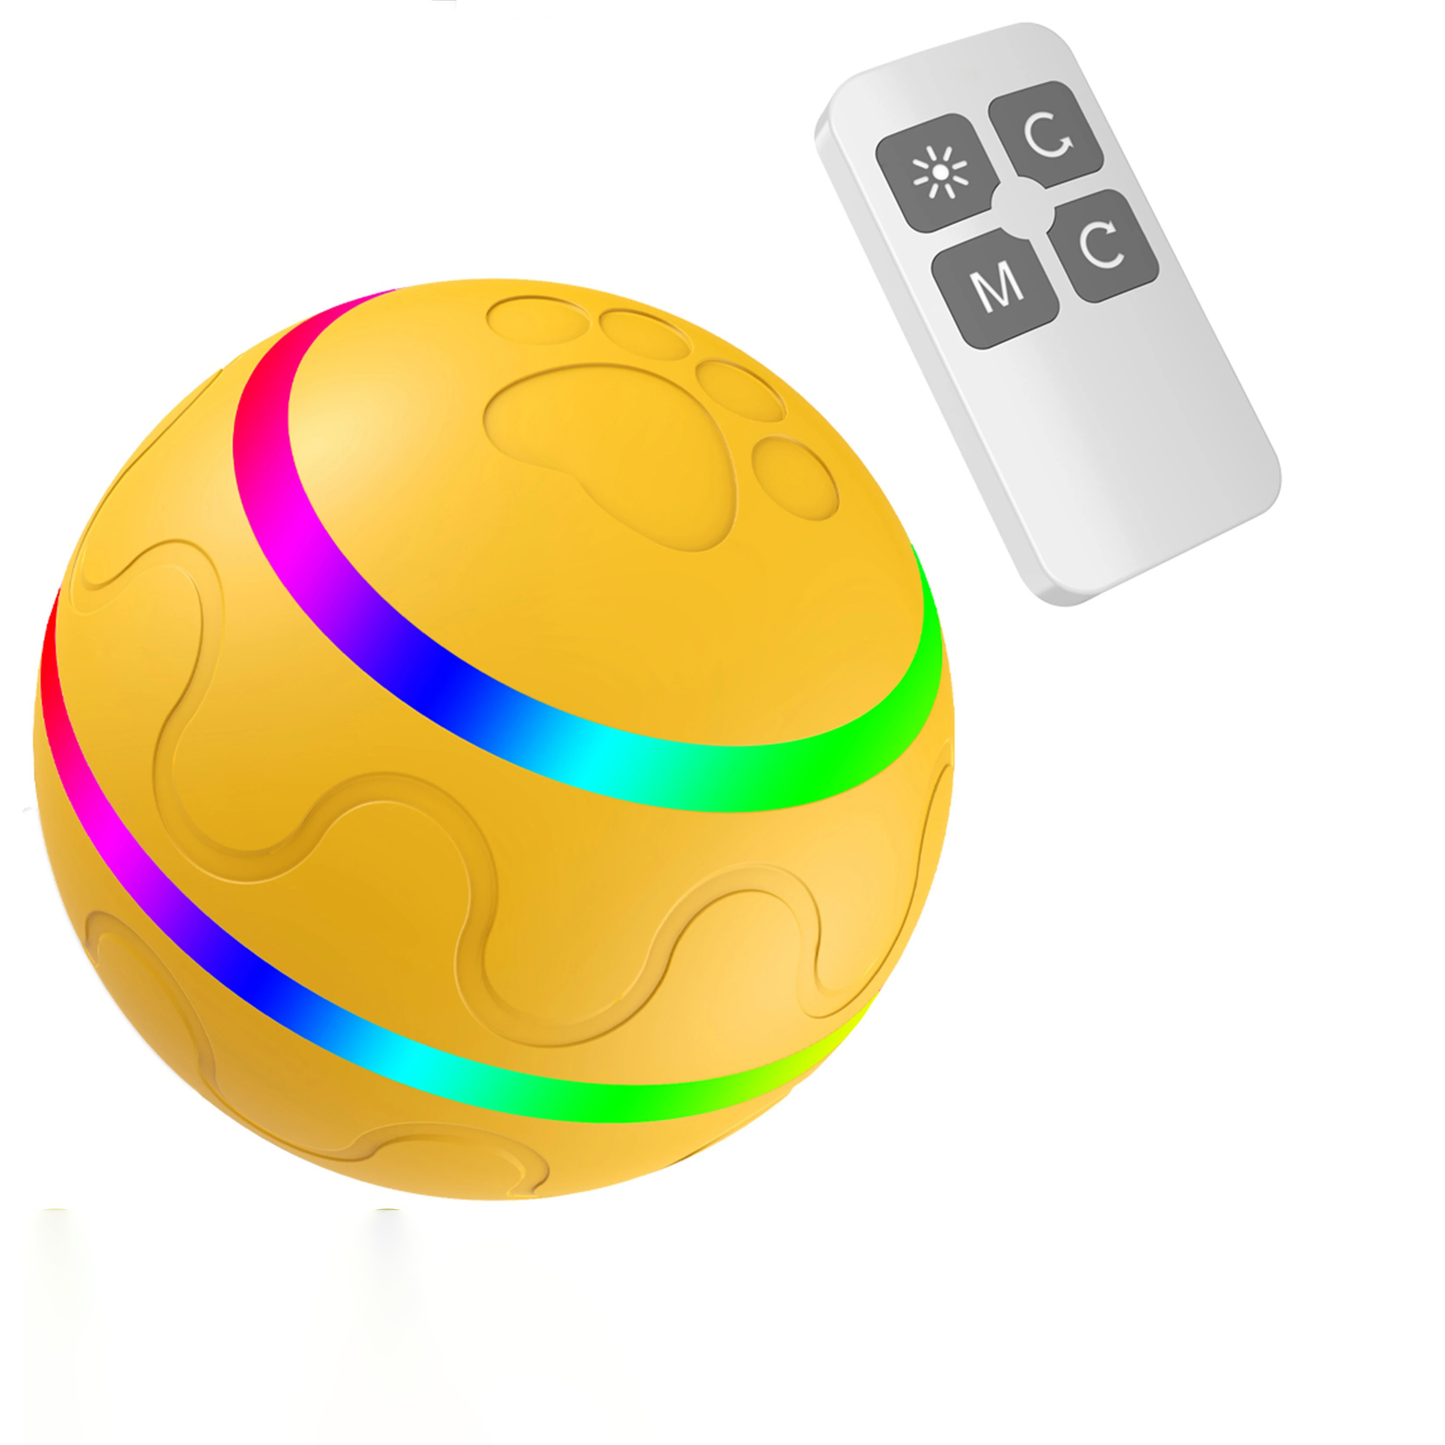 USB Rechargeable Self-Moving Smart Toy Ball for Dogs